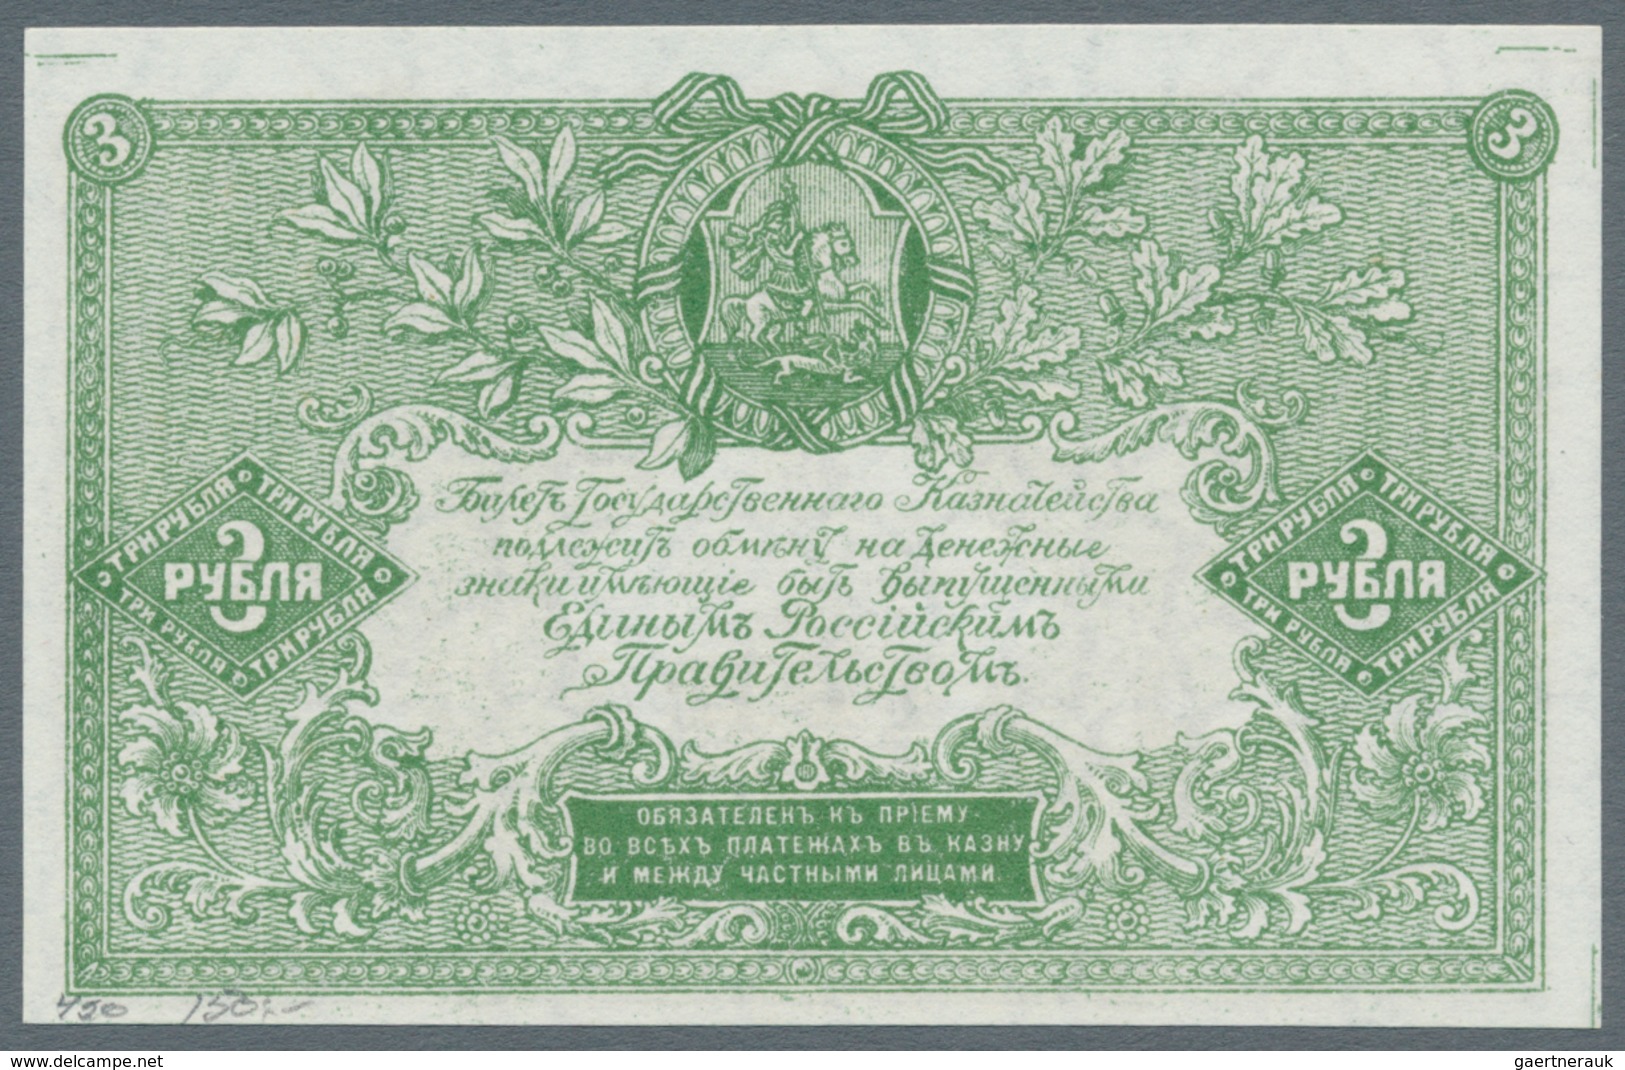 Russia / Russland: South Russia and Rostov on Don set with 13 Banknotes comprising for example Odess